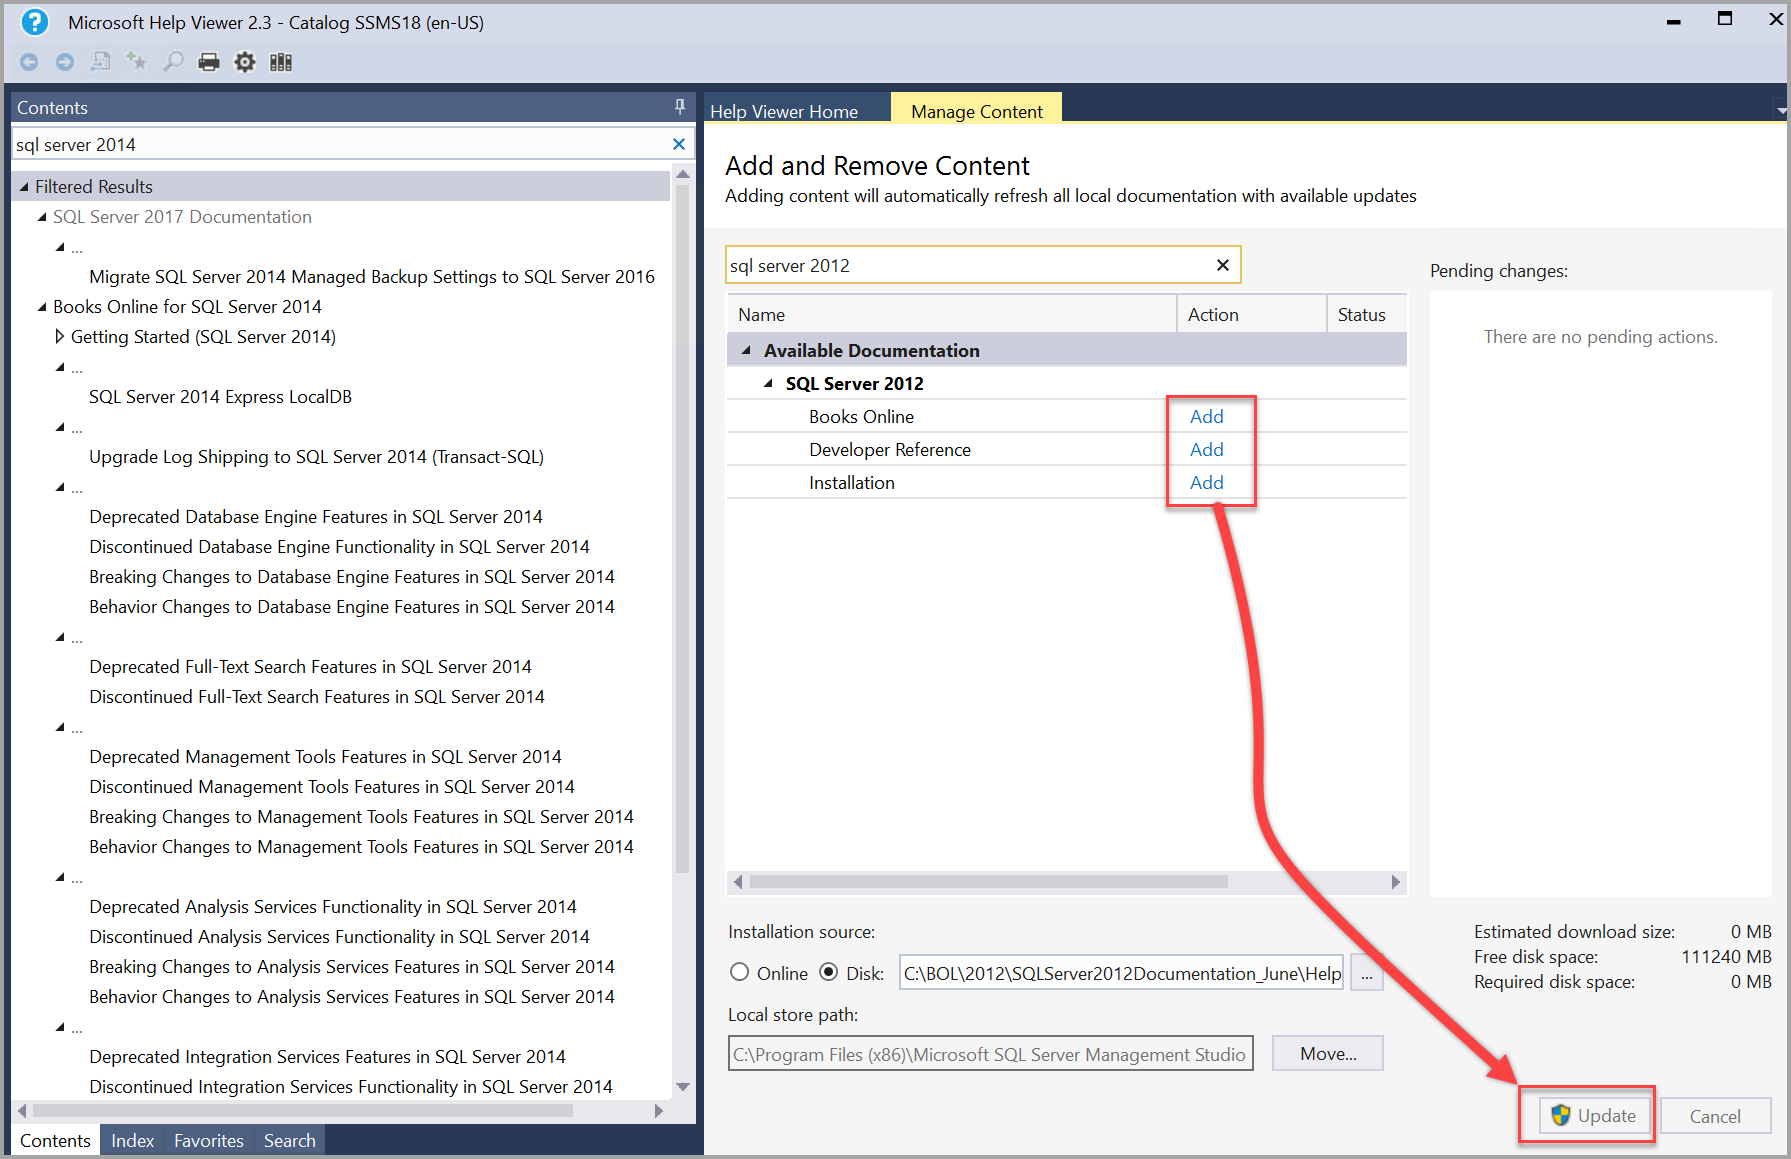 Screenshot of SQL Server 2012 documentation add and update in Help Viewer.